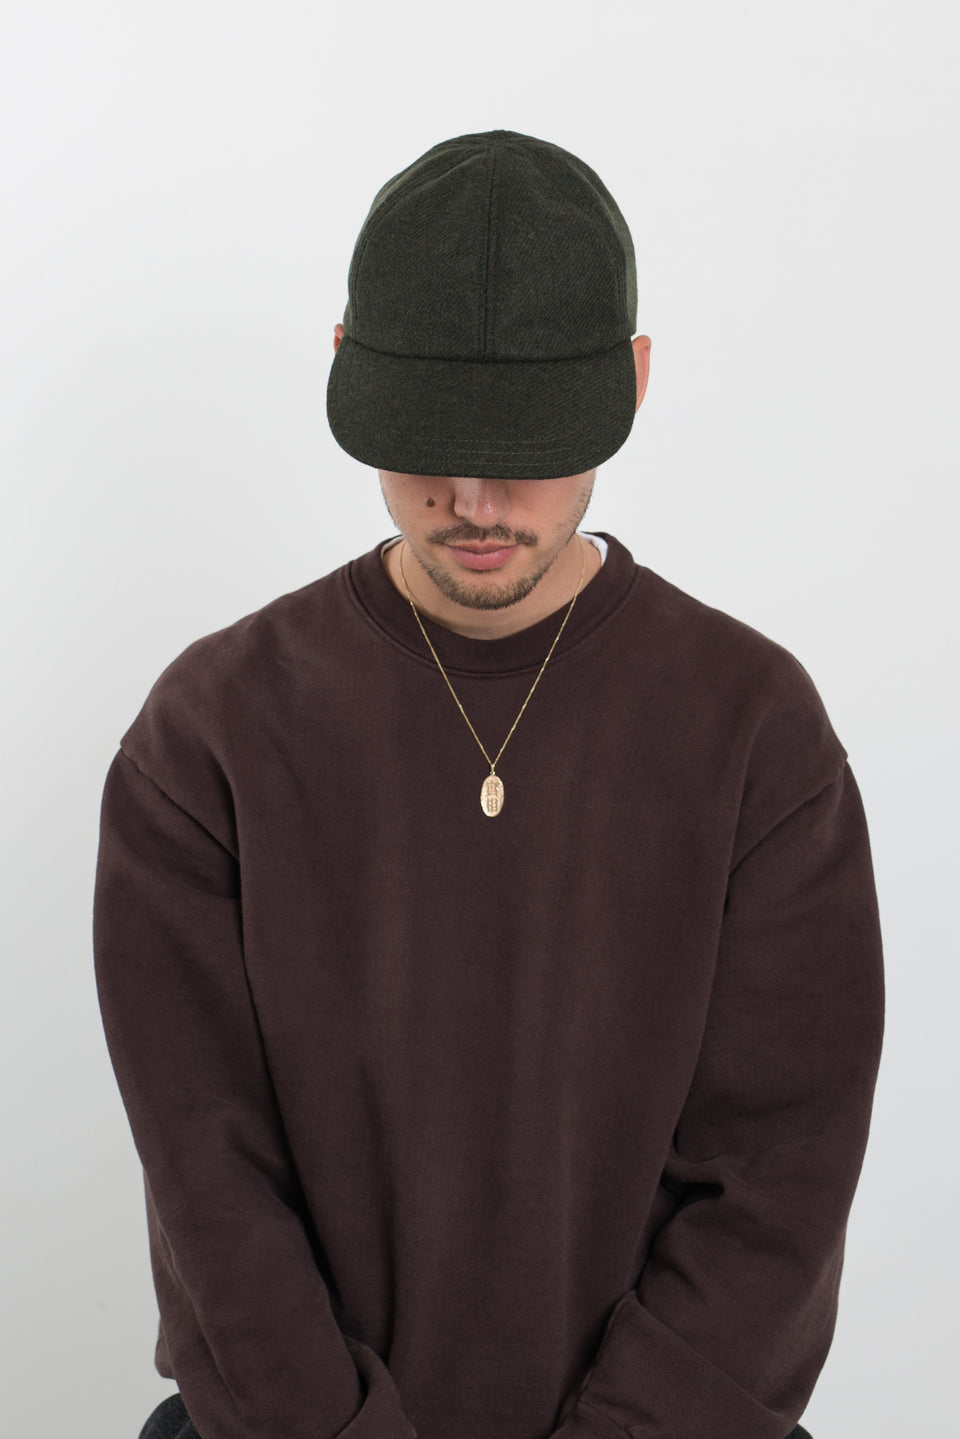 Found Feather Japan FW22 Classic 6 Panel Cap Mélange Wool Green Calculus Victoria BC Canada